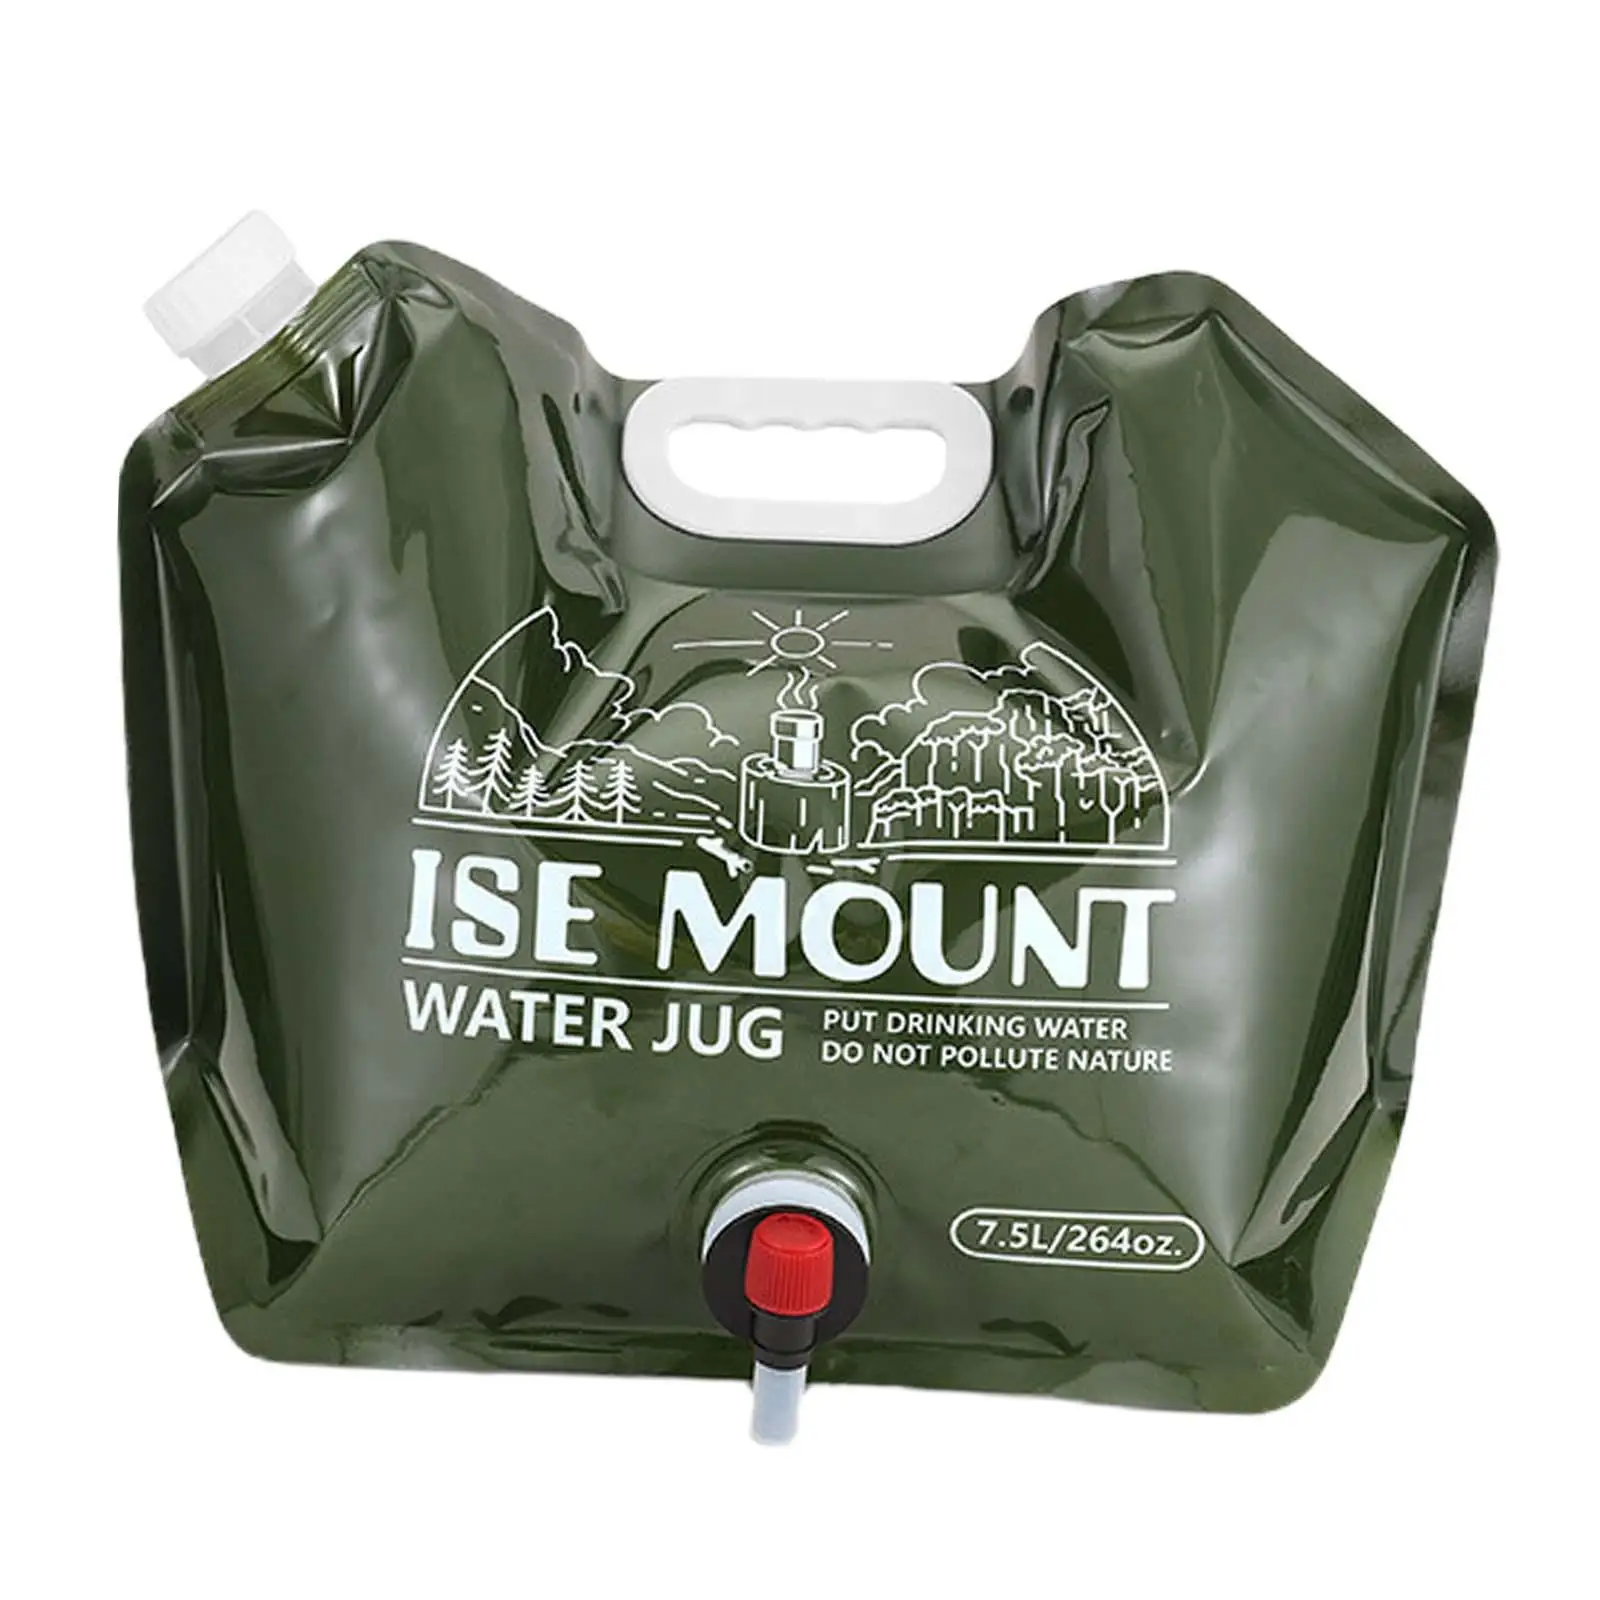 Collapsible Water Storage Bag Container 7.5L with Rotary Faucet Emergency Water